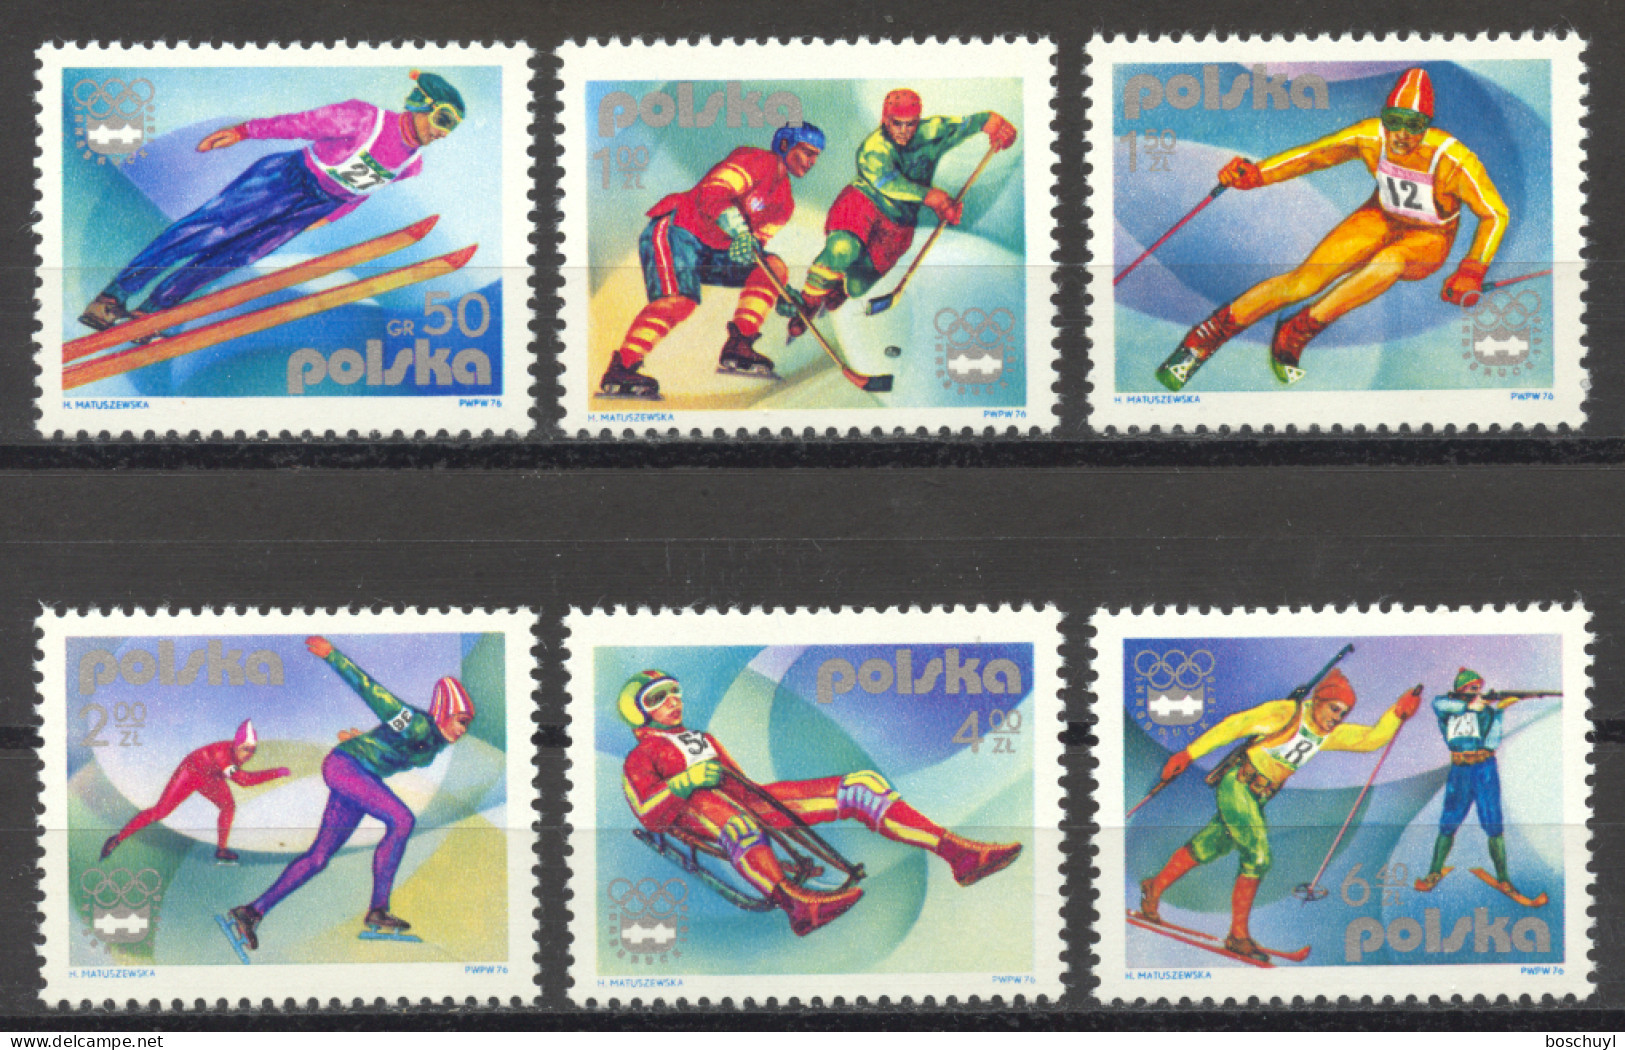 Poland, 1976, Olympic Winter Games Innsbruck, Sports, MNH, Michel 2421-2426 - Unused Stamps